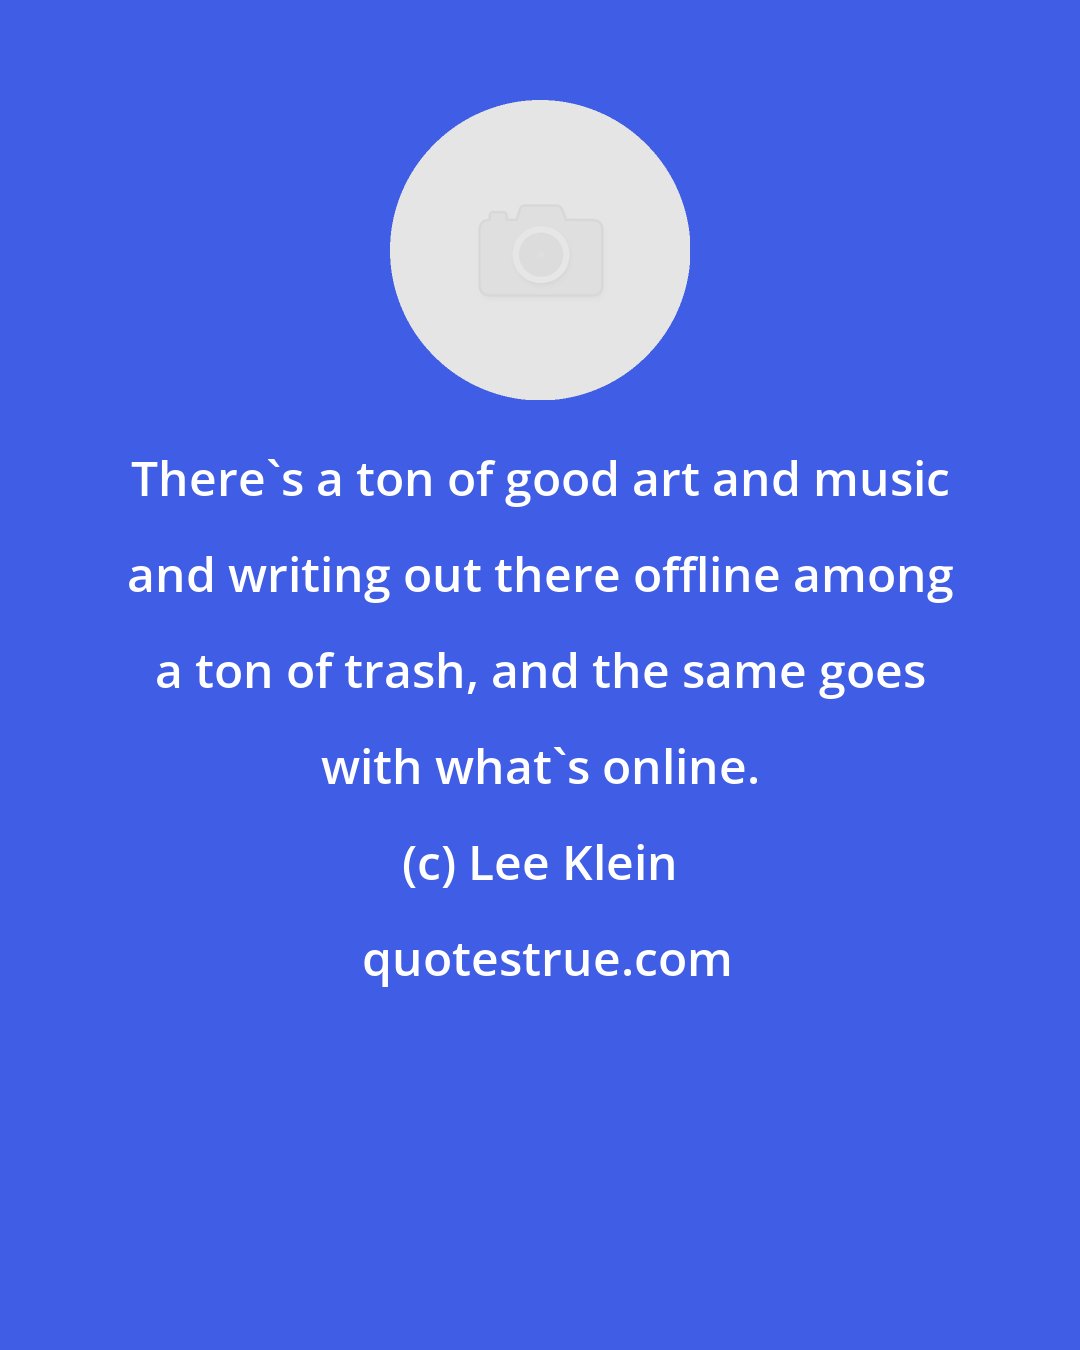 Lee Klein: There's a ton of good art and music and writing out there offline among a ton of trash, and the same goes with what's online.